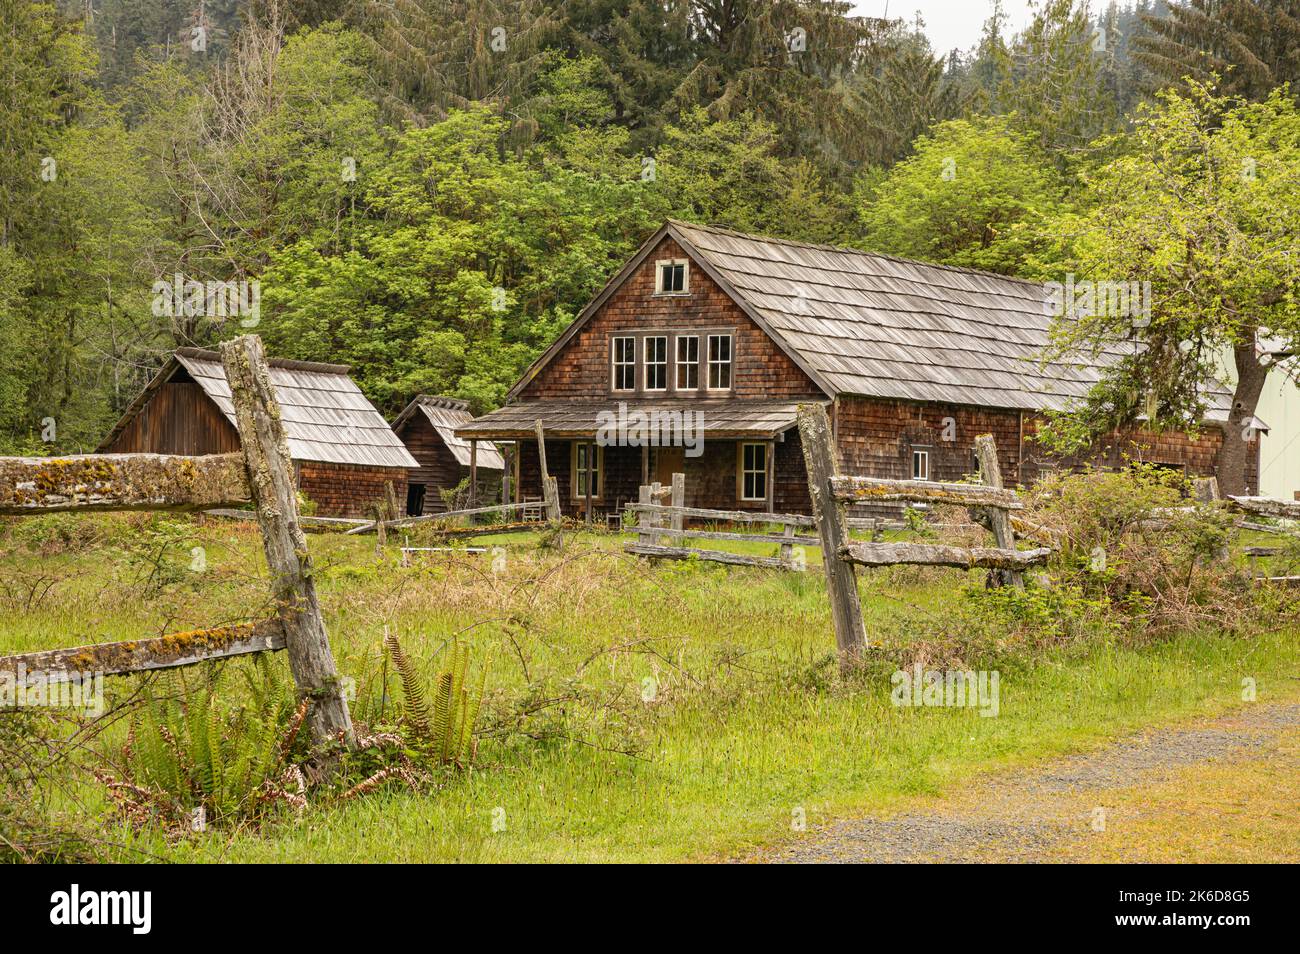 WA22248-00...WASHINGTON - The historic Kestner Homestead in the Quinault Rain Forest of Olympic National Park. Stock Photo